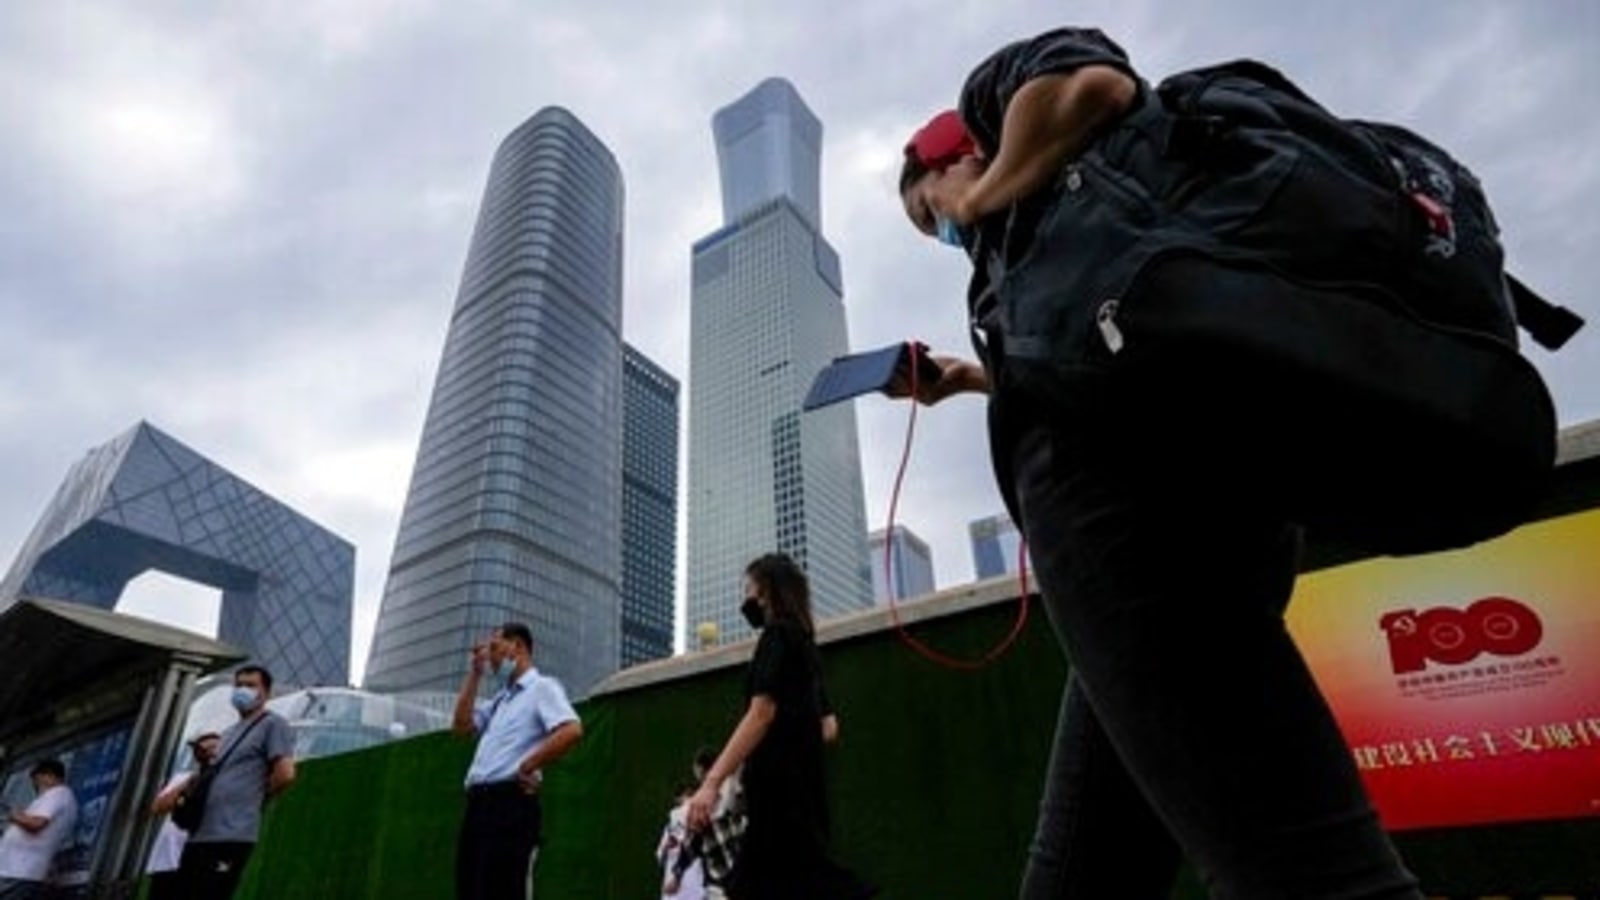 China bans construction of tallest skyscrapers over public safety concerns | World News